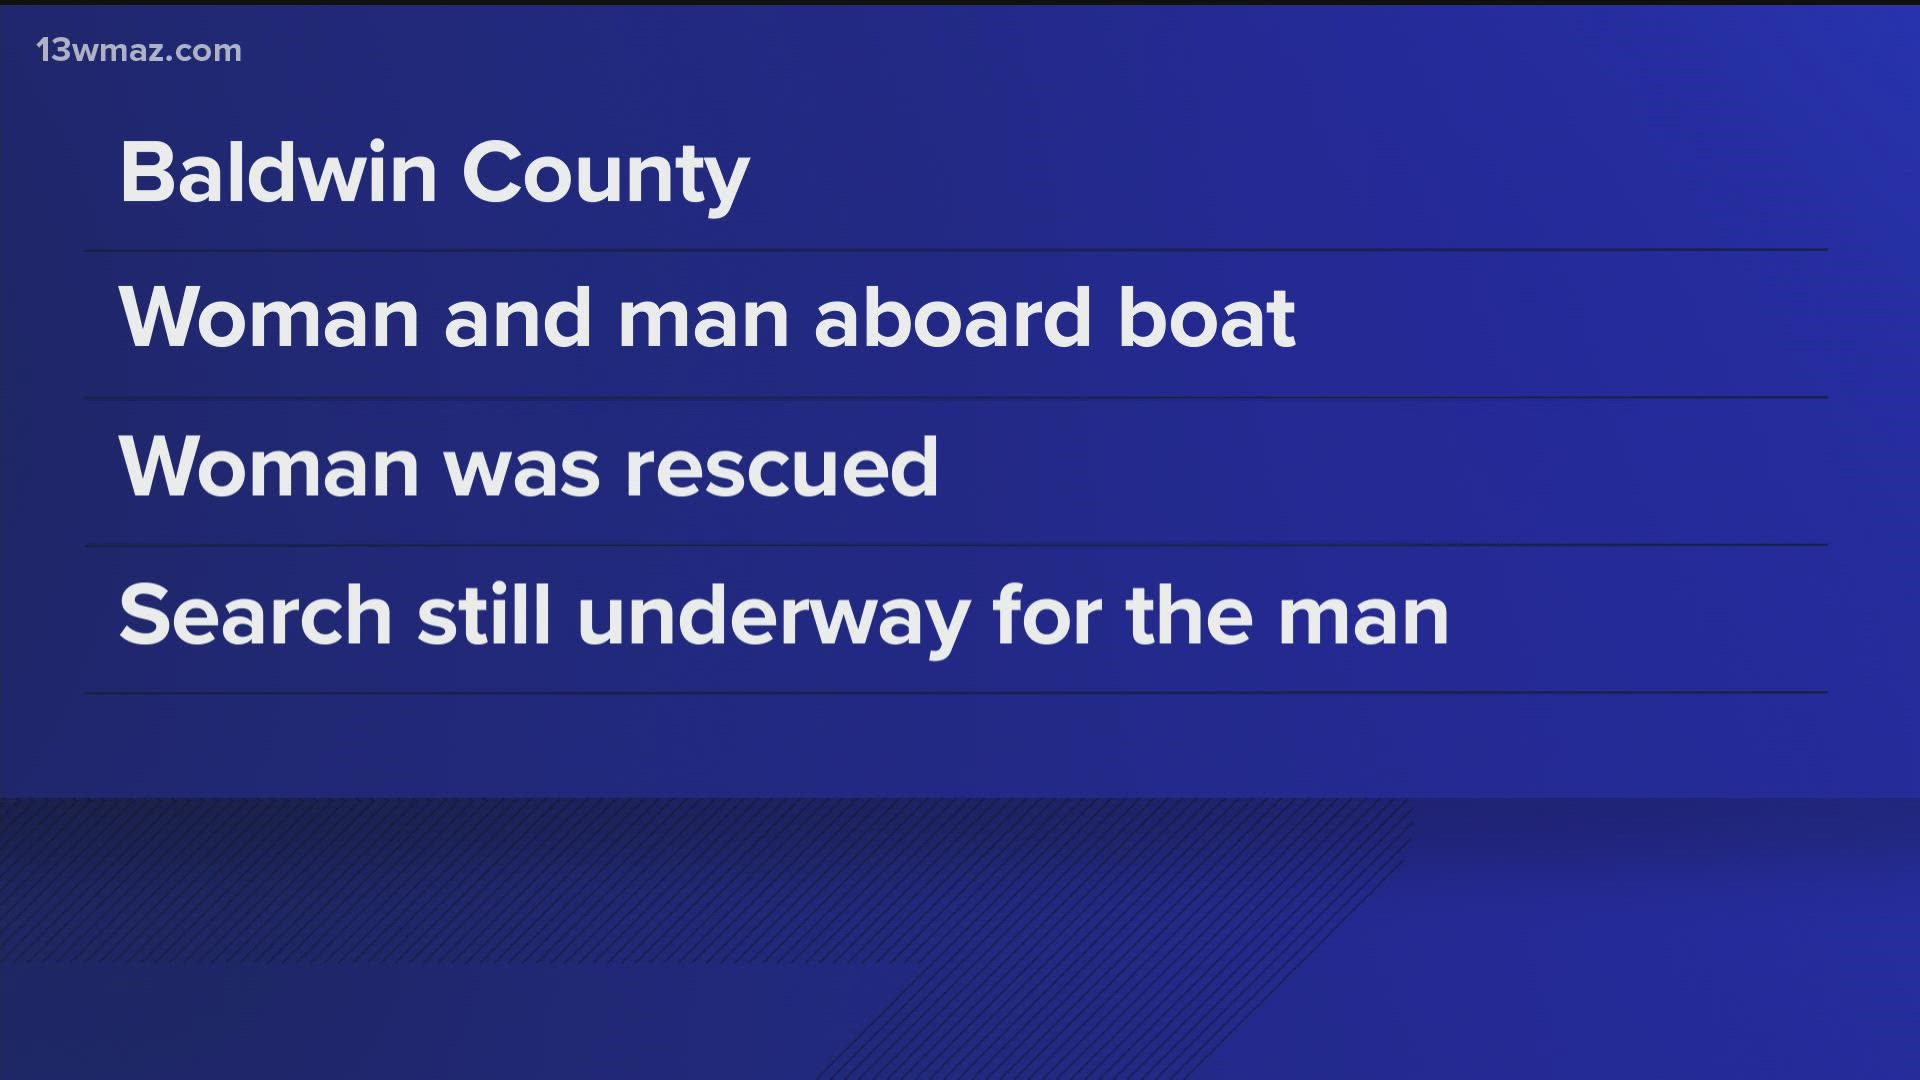 Crews in Baldwin County rescued one person and are searching for another after a boat sank on Lake Sinclair Tuesday night.